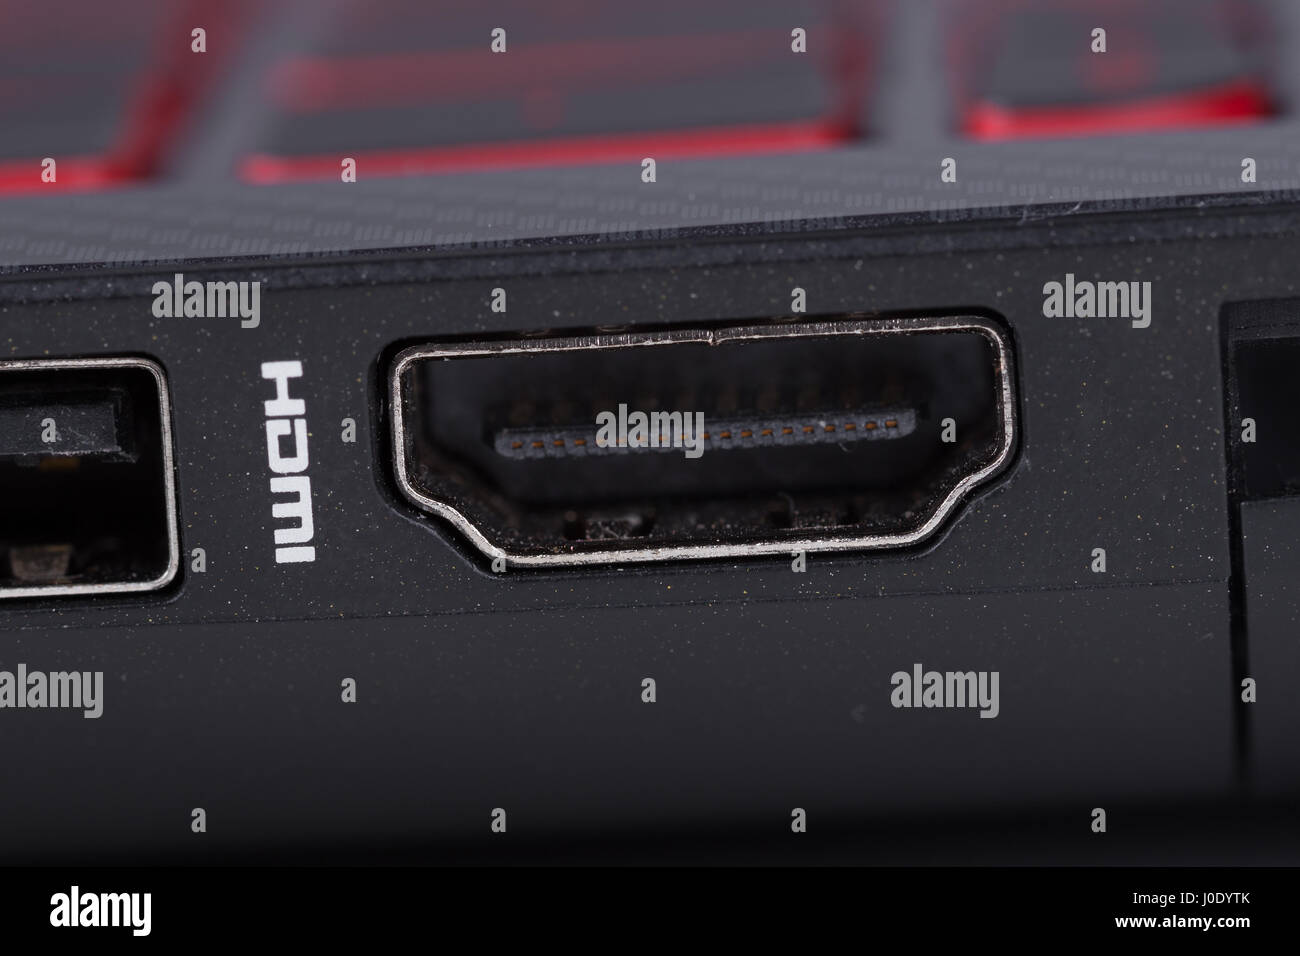 close up Sockets HDMI port of a laptop Stock Photo